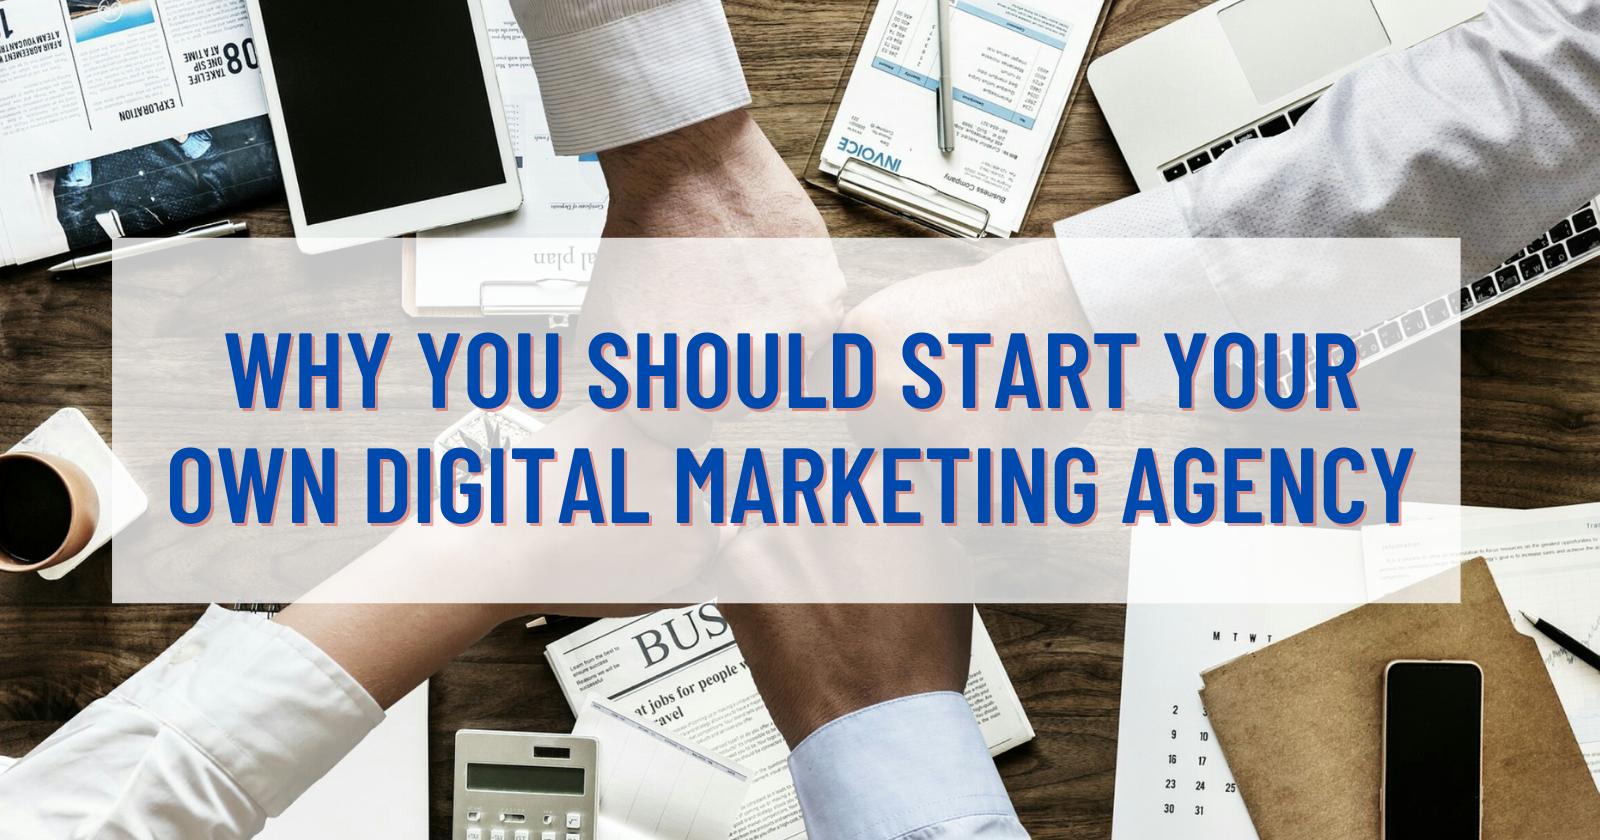 Digital Marketing: What You Need to Know